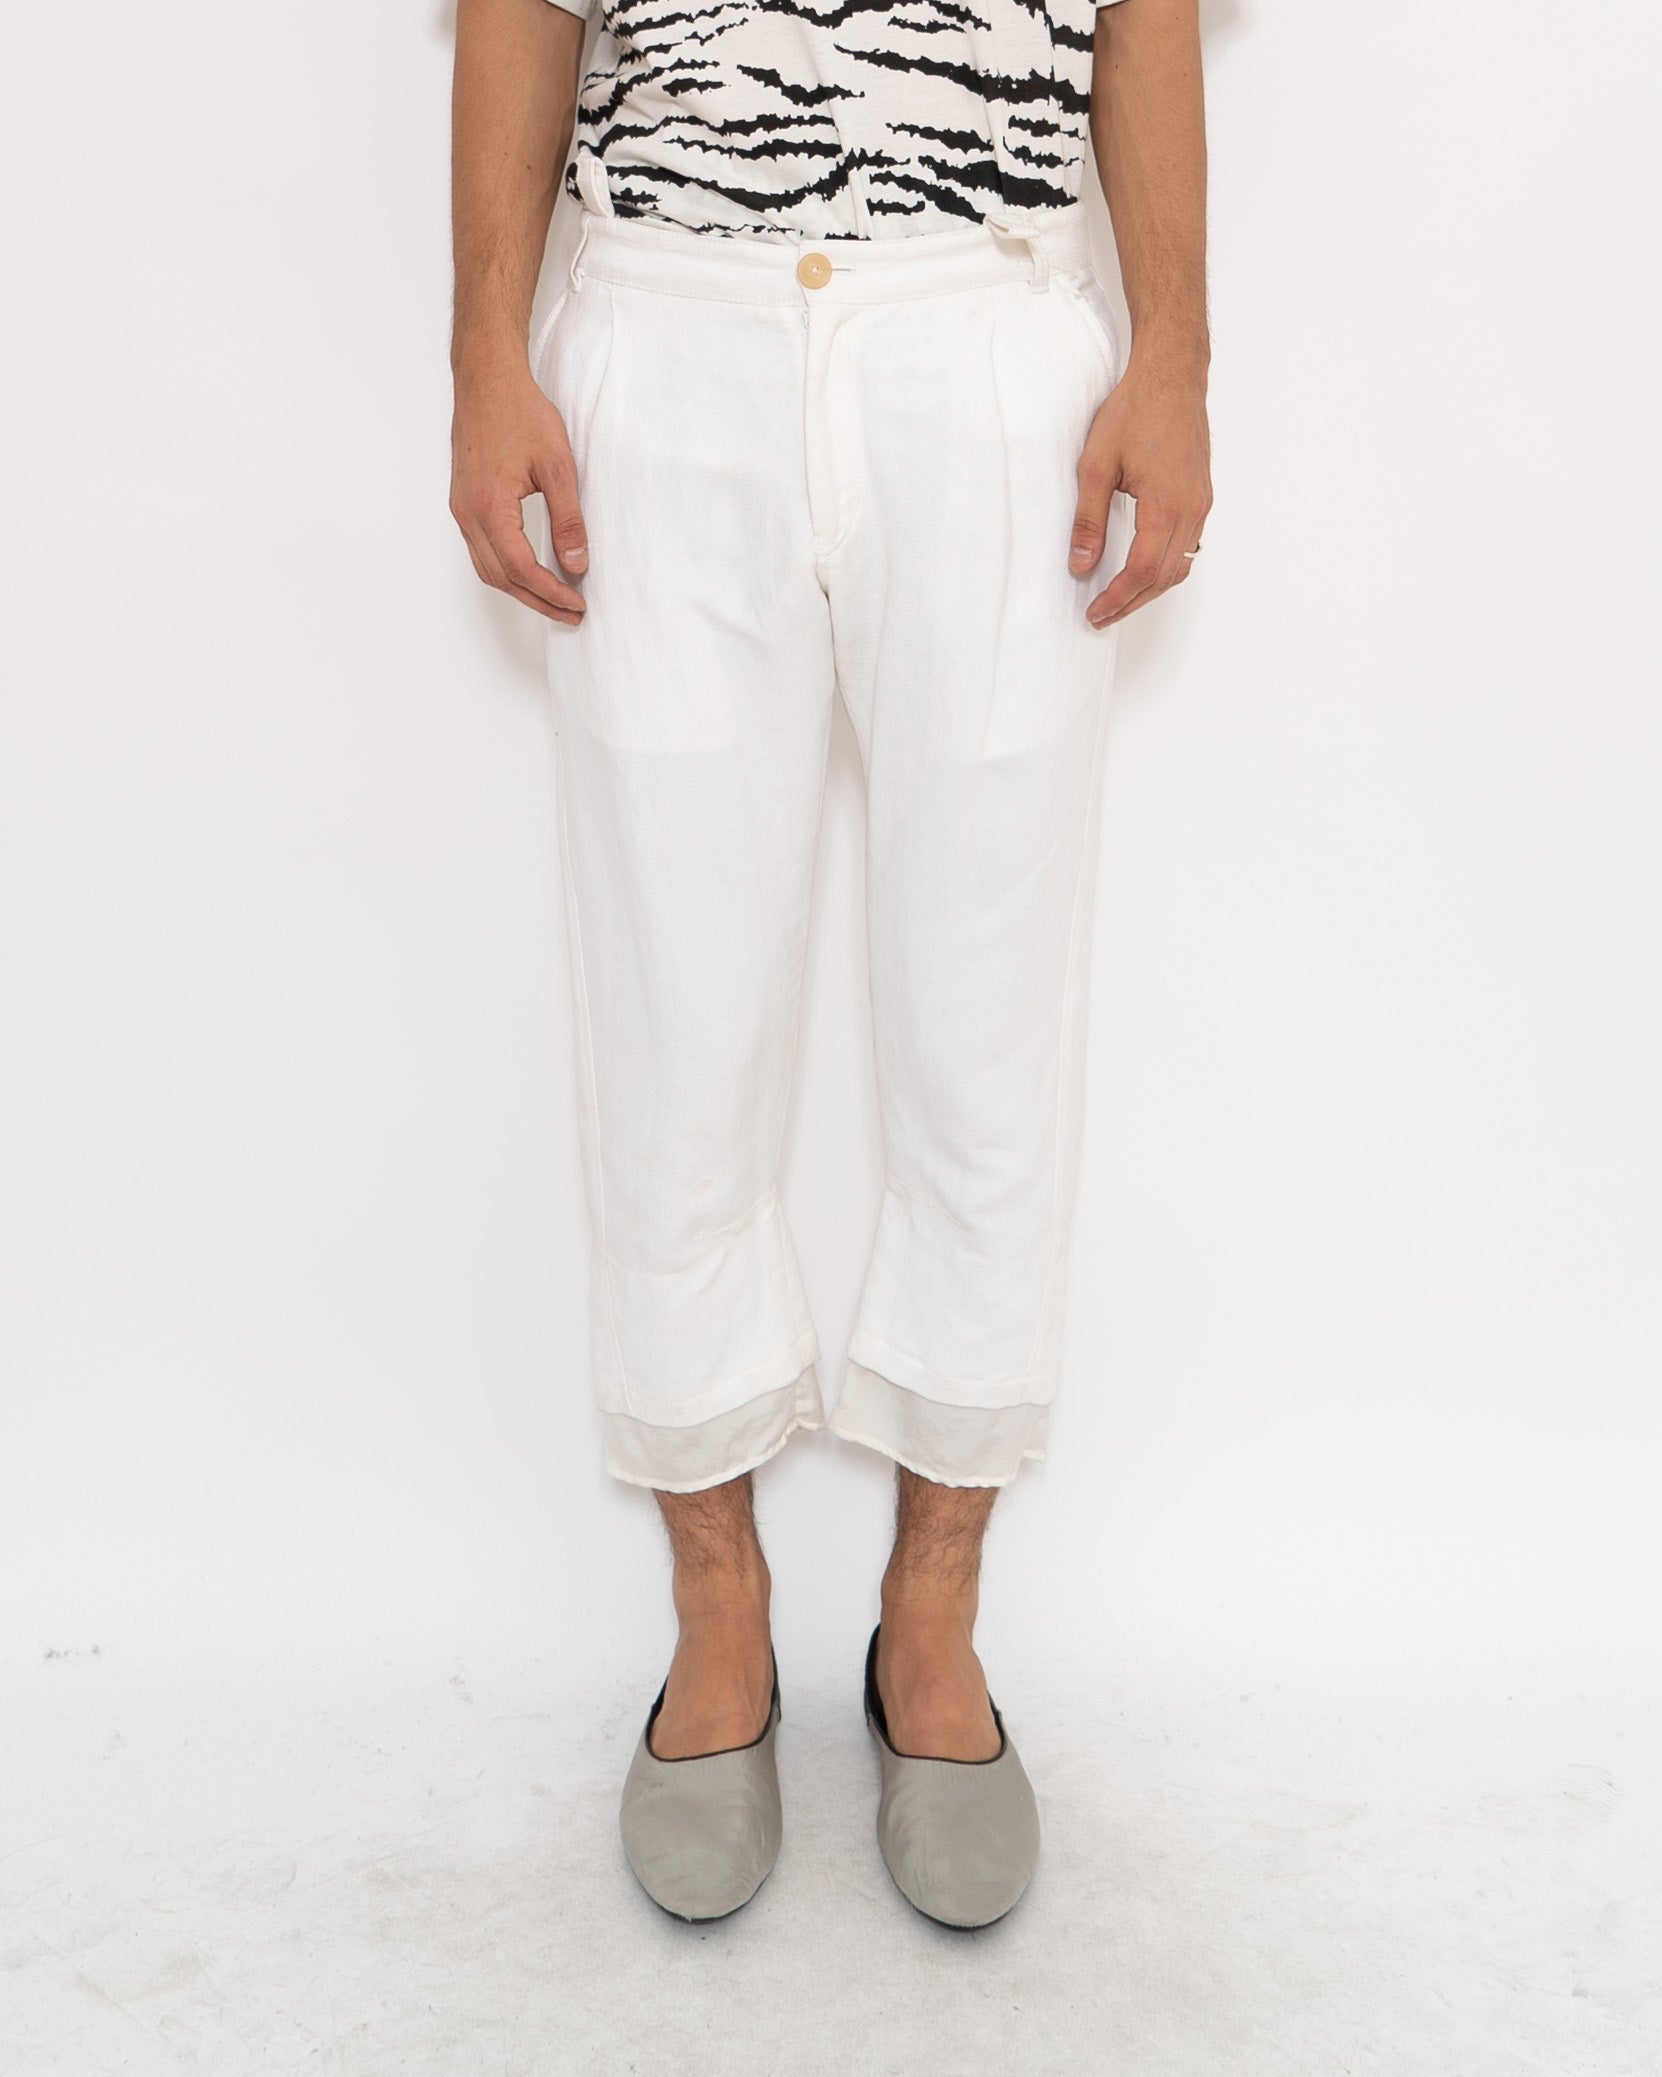 SS16 Intial White Linen Trousers Sample